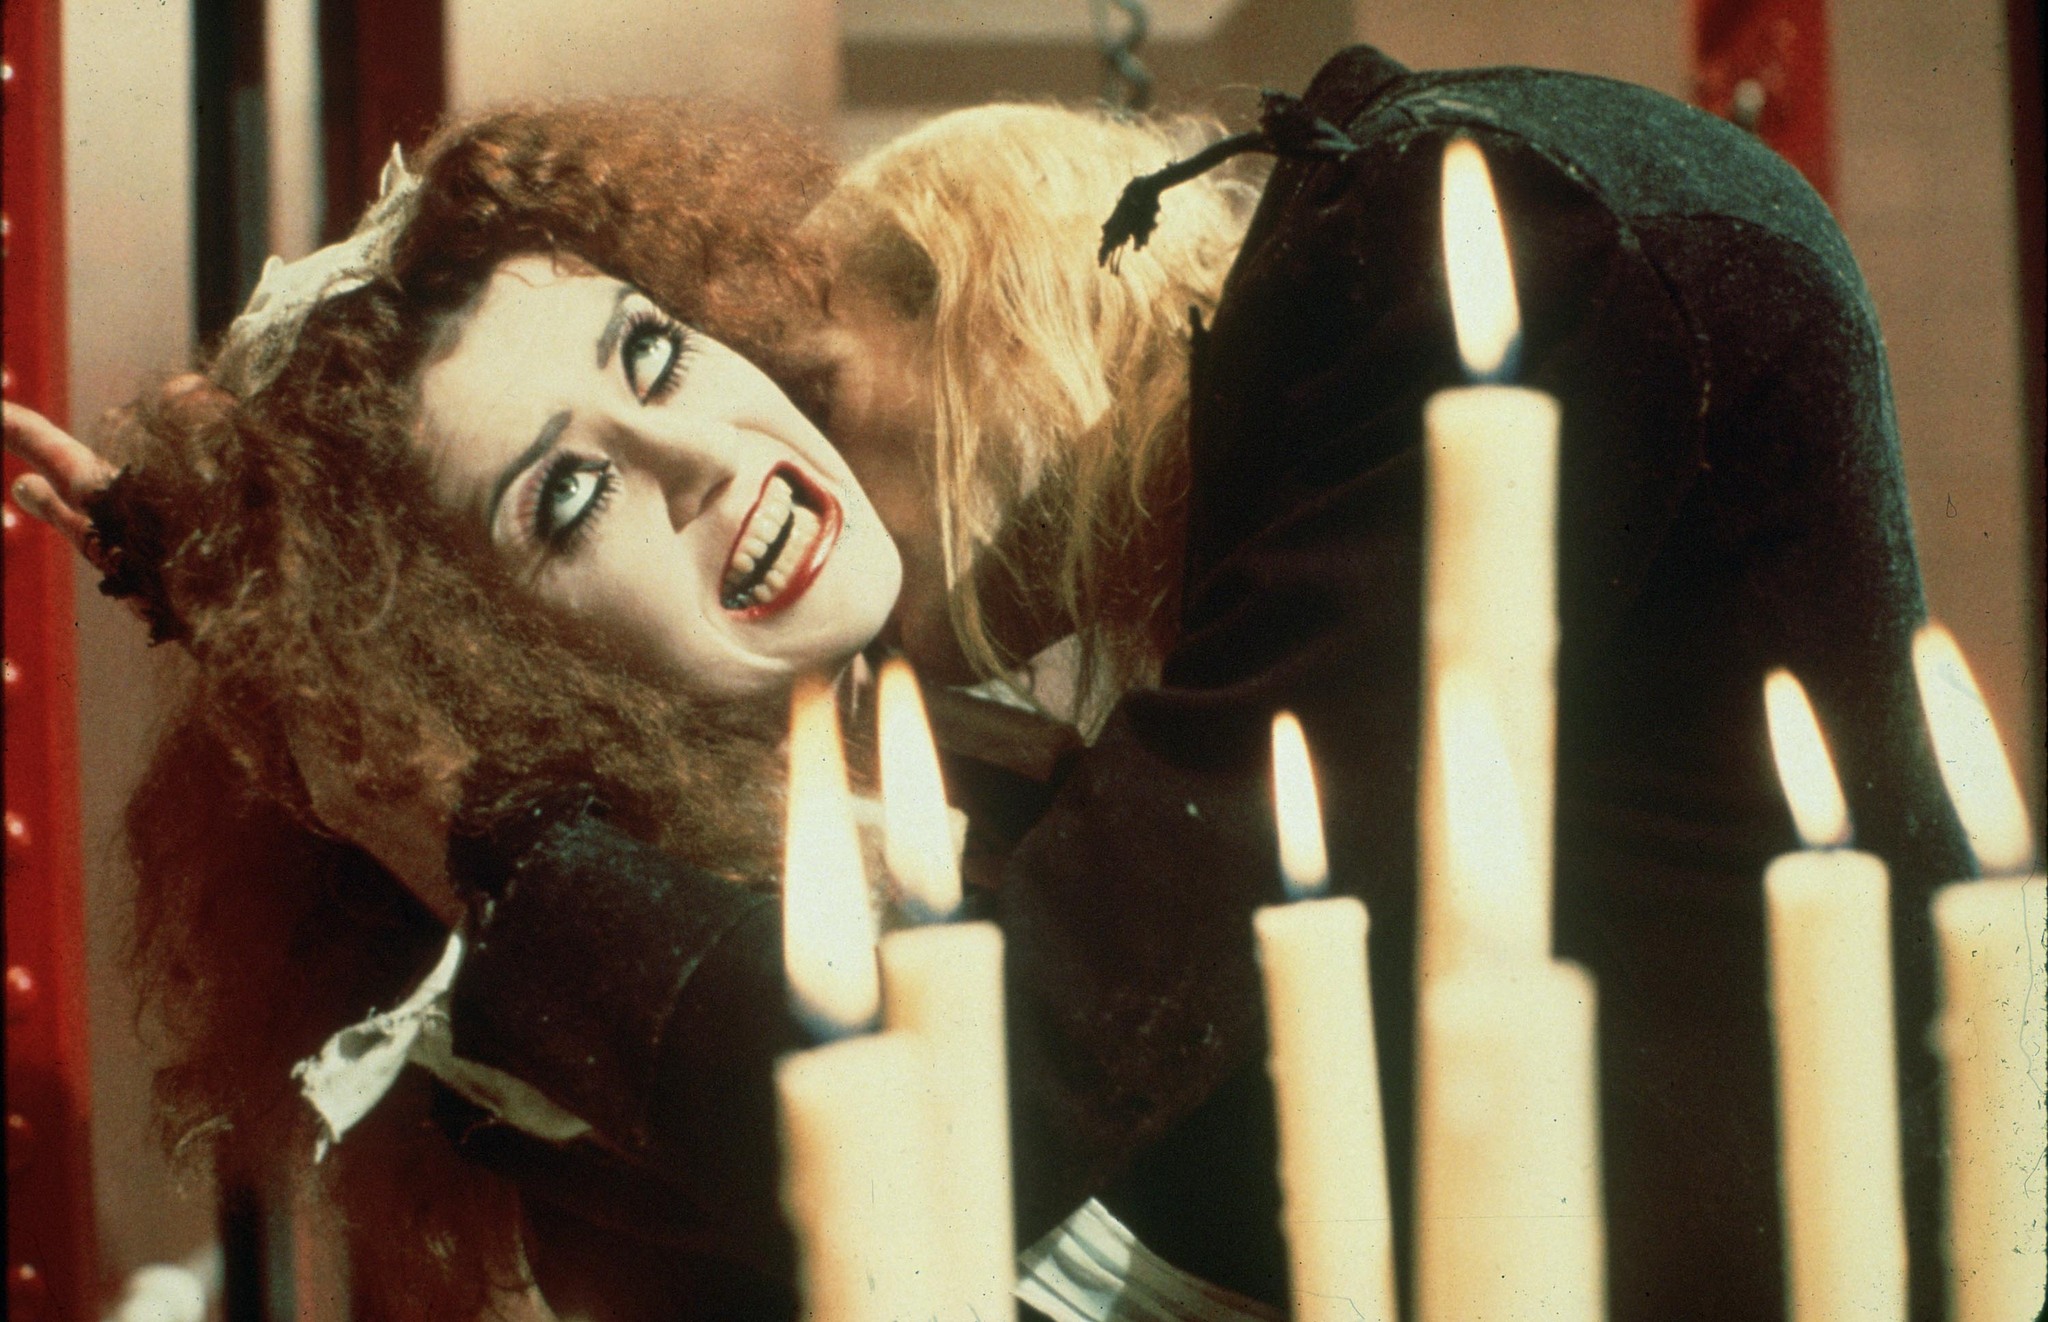 Still of Richard O'Brien and Patricia Quinn in The Rocky Horror Picture Show (1975)